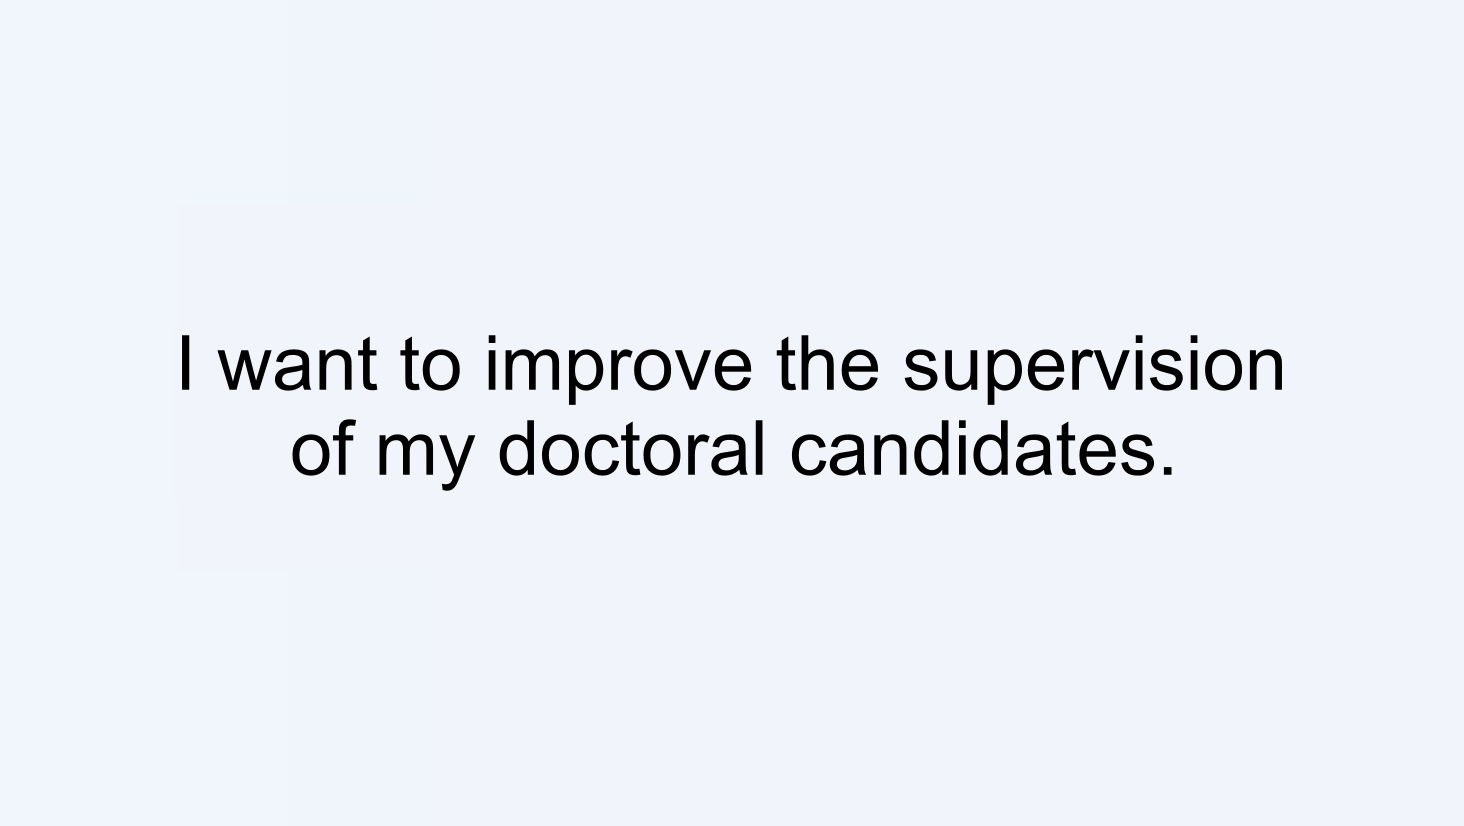 I want to improve the supervision of my doctoral candidates.